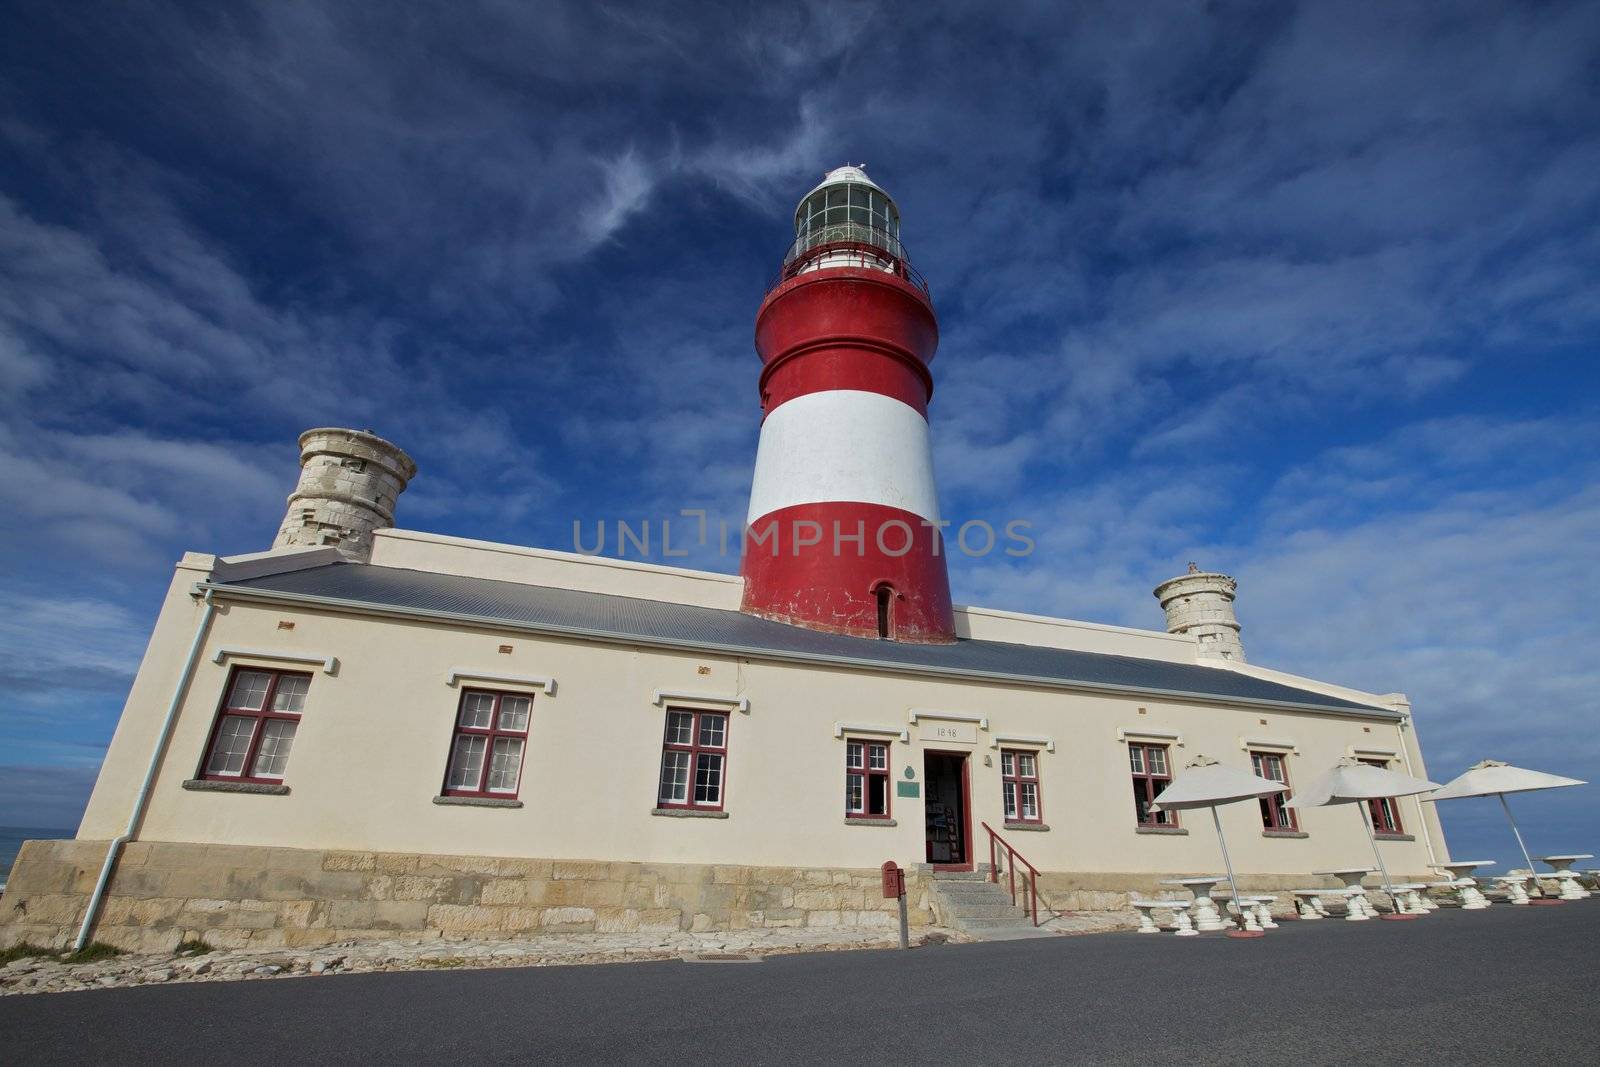 Cape Agulhas Lighthouse is situated at the Southern most tip of Africa 